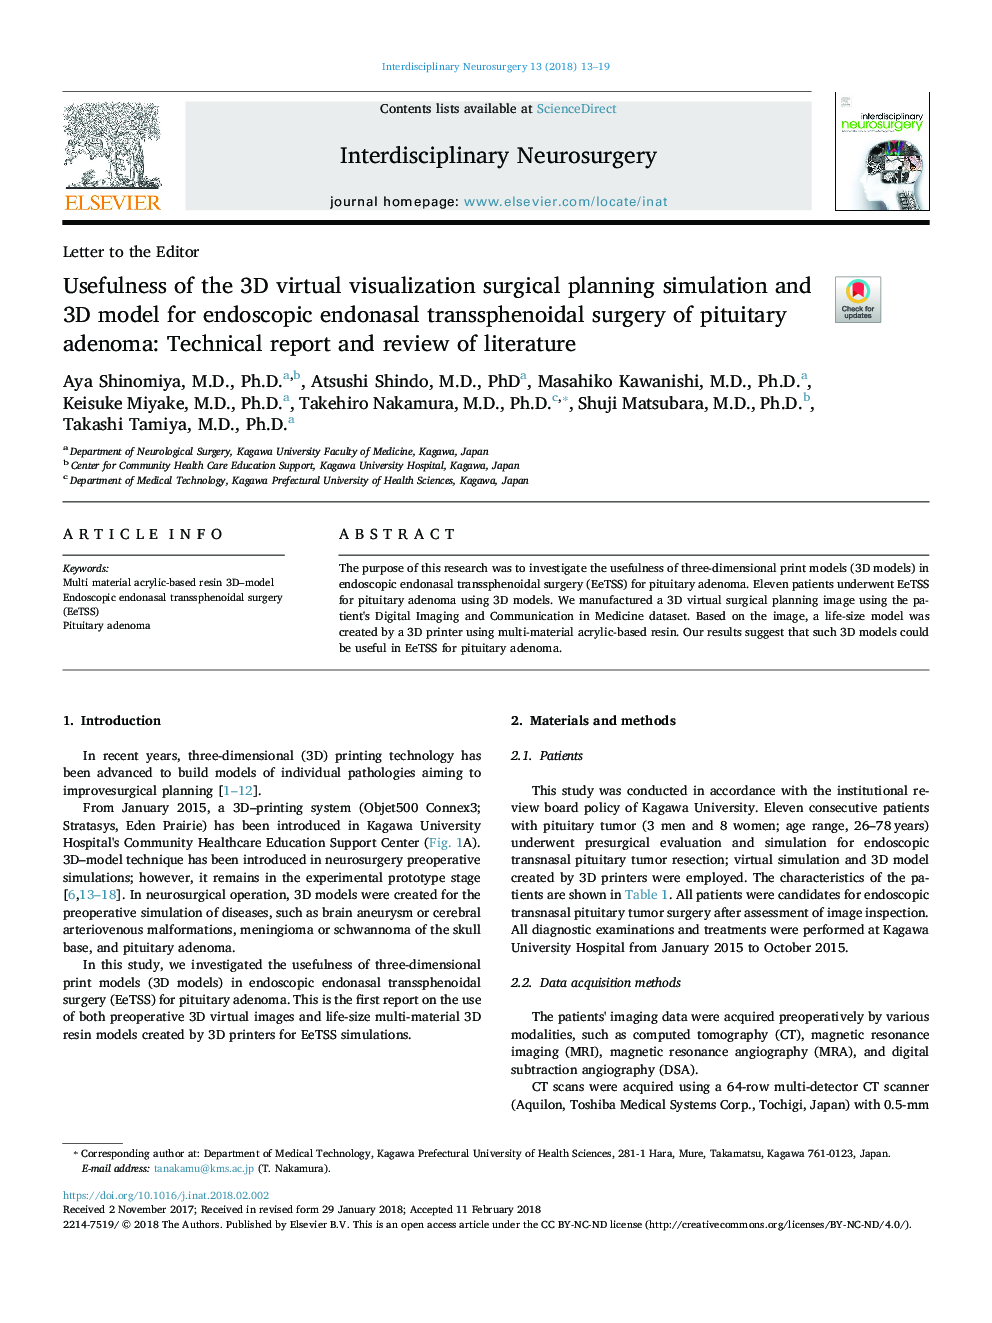 Usefulness of the 3D virtual visualization surgical planning simulation and 3D model for endoscopic endonasal transsphenoidal surgery of pituitary adenoma: Technical report and review of literature